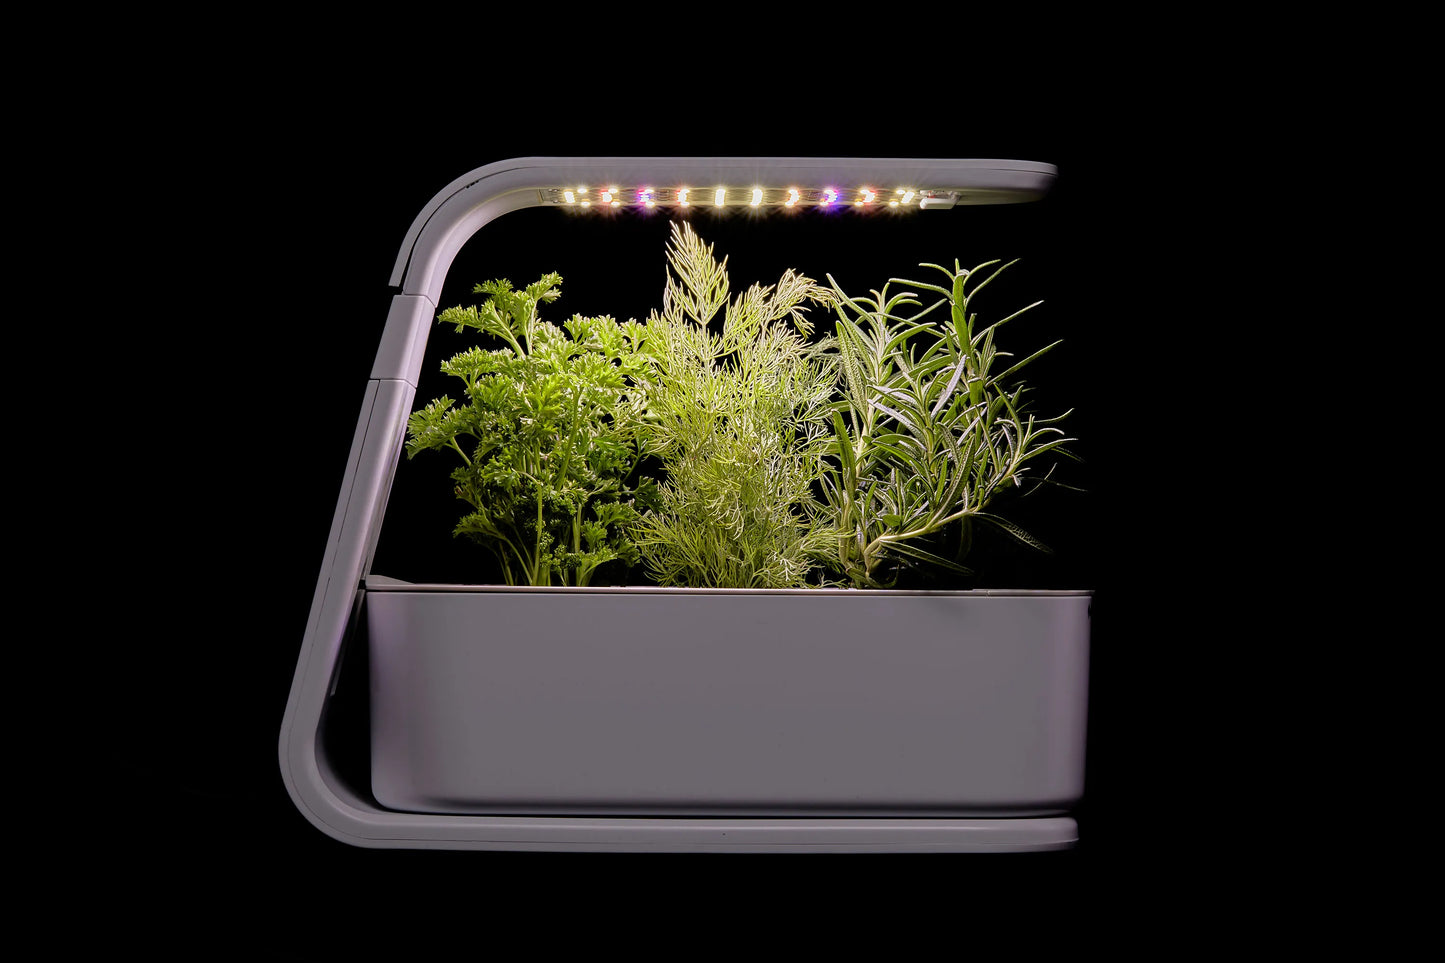 Nature's Touch: The Ultimate Smart Garden Planter for Your Home